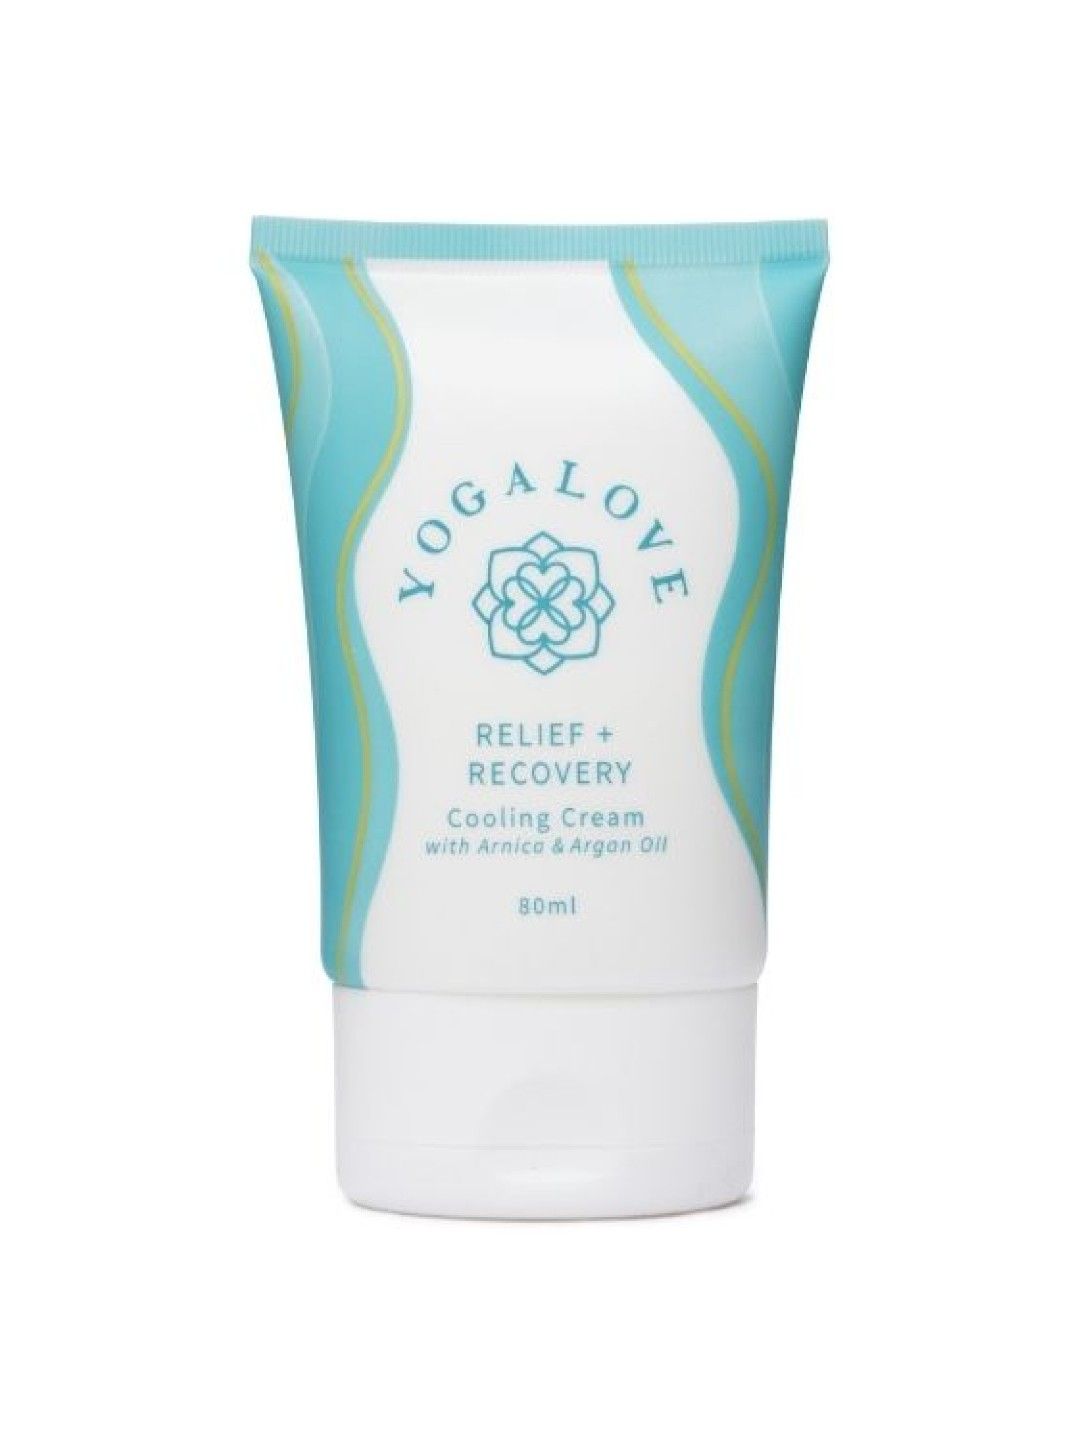 YogaLove Cooling Cream Relief + Recovery (80ml)